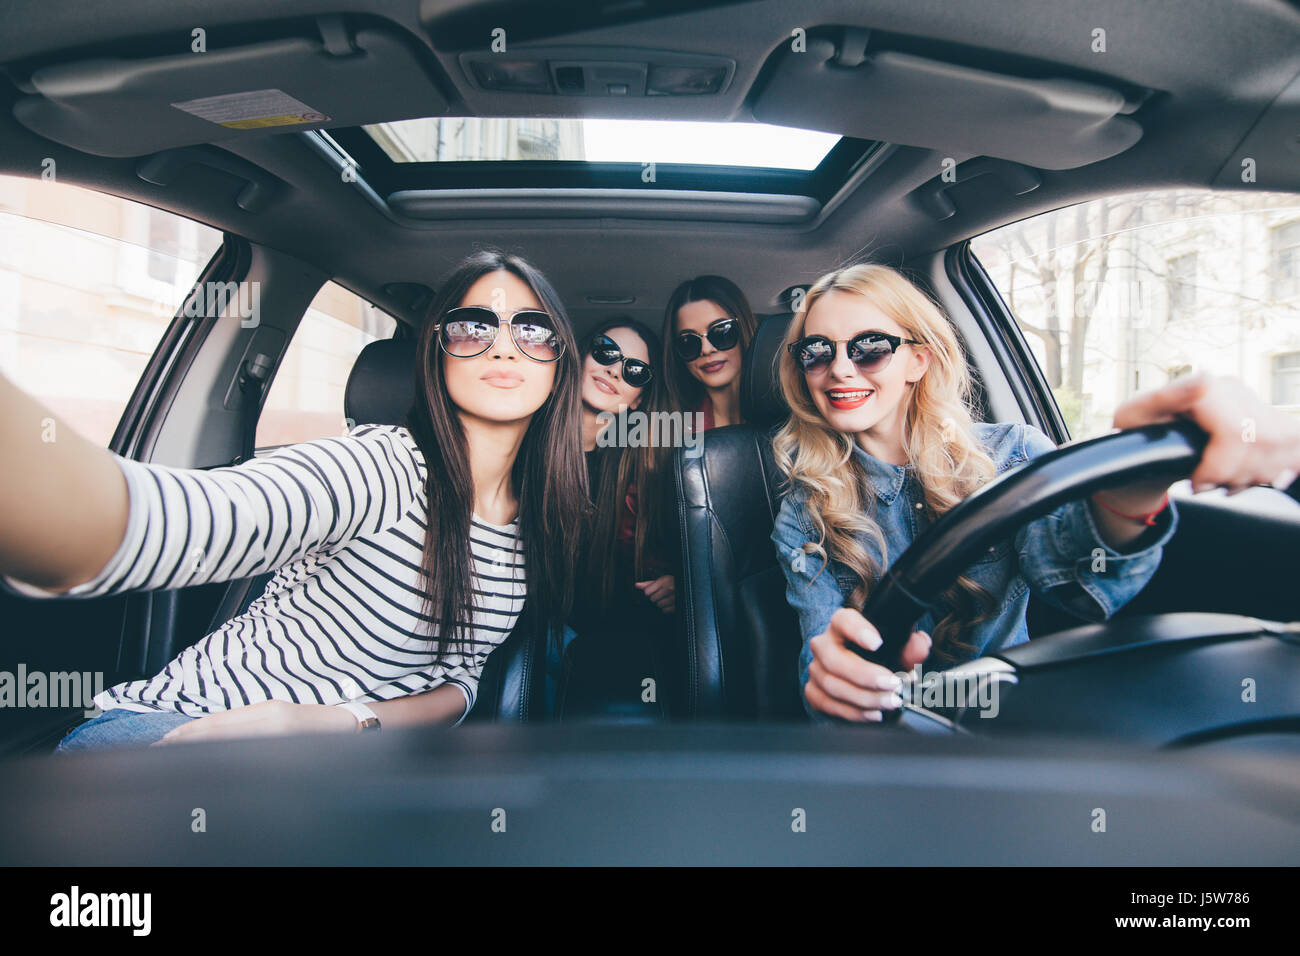 Group Of Girls Having Fun In The Car And Taking Selfies With Camera 